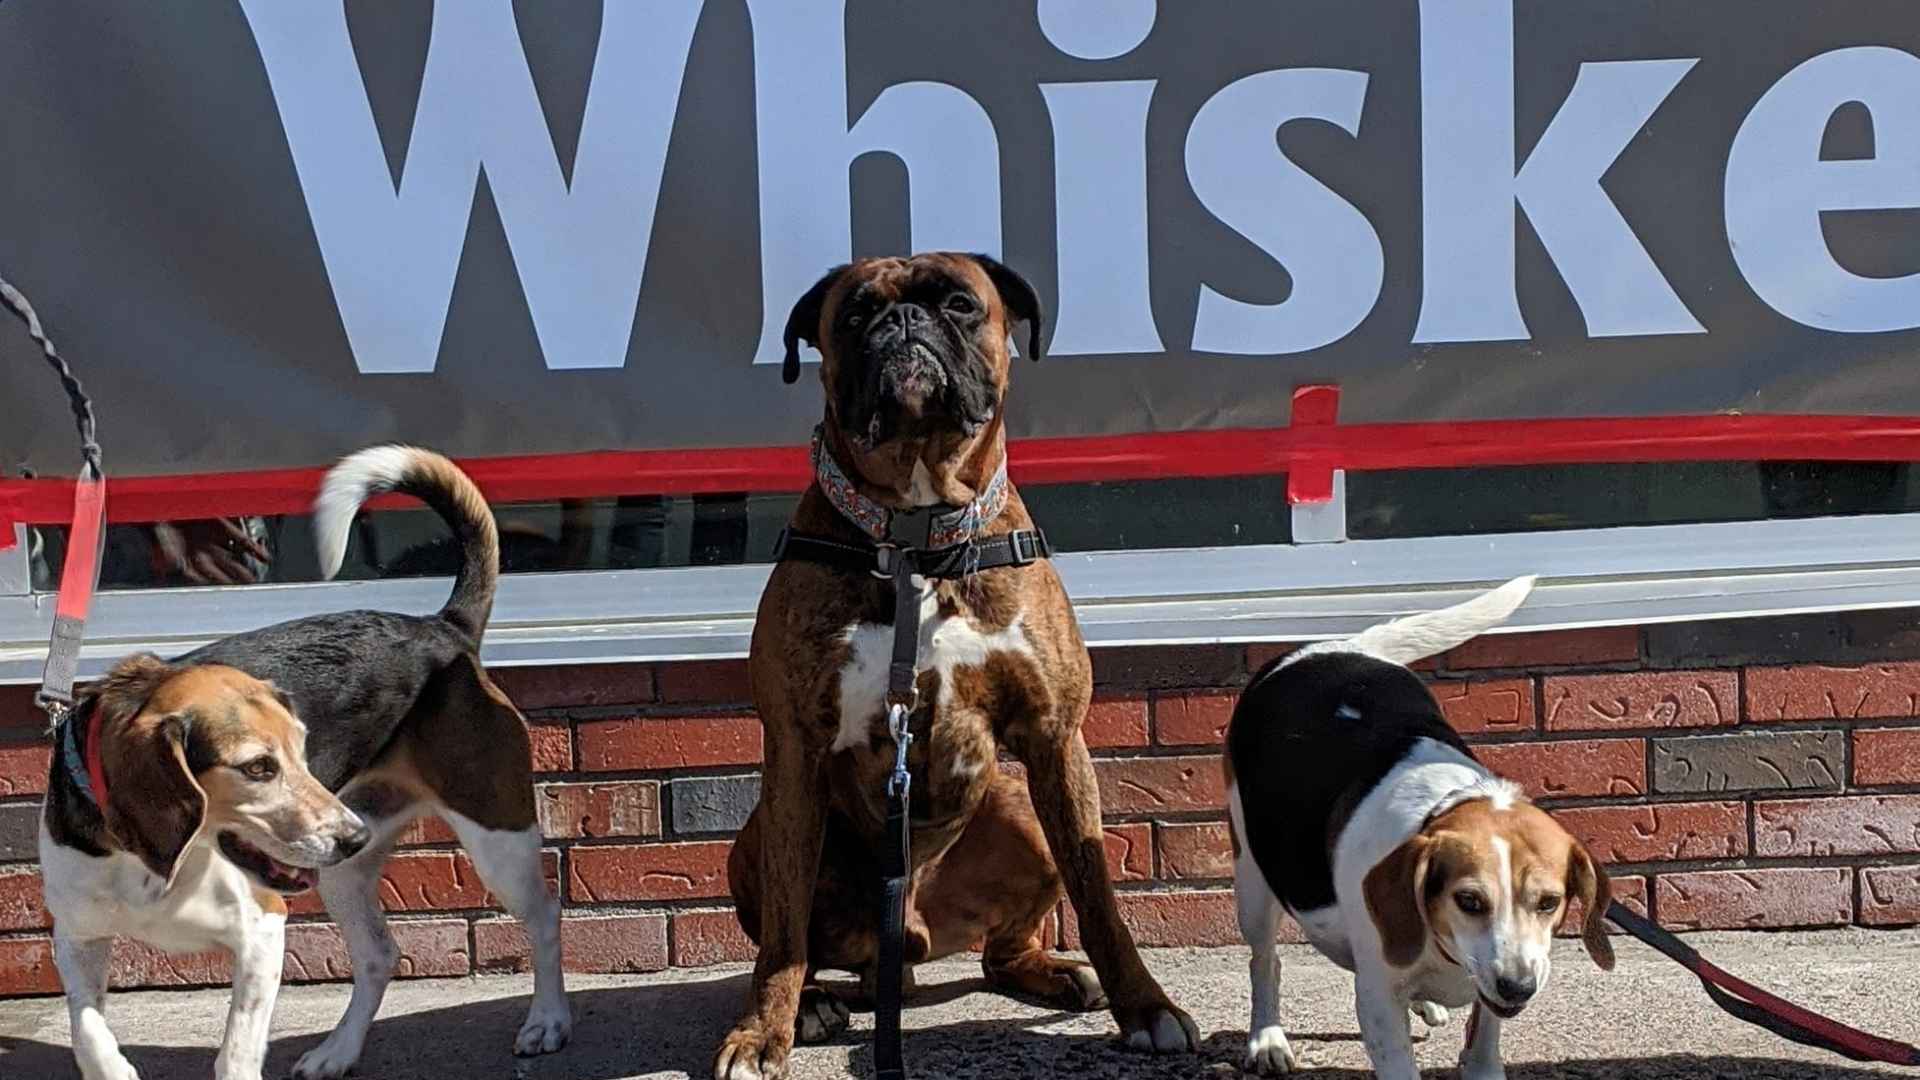 Wags to Whiskers, Pet Store